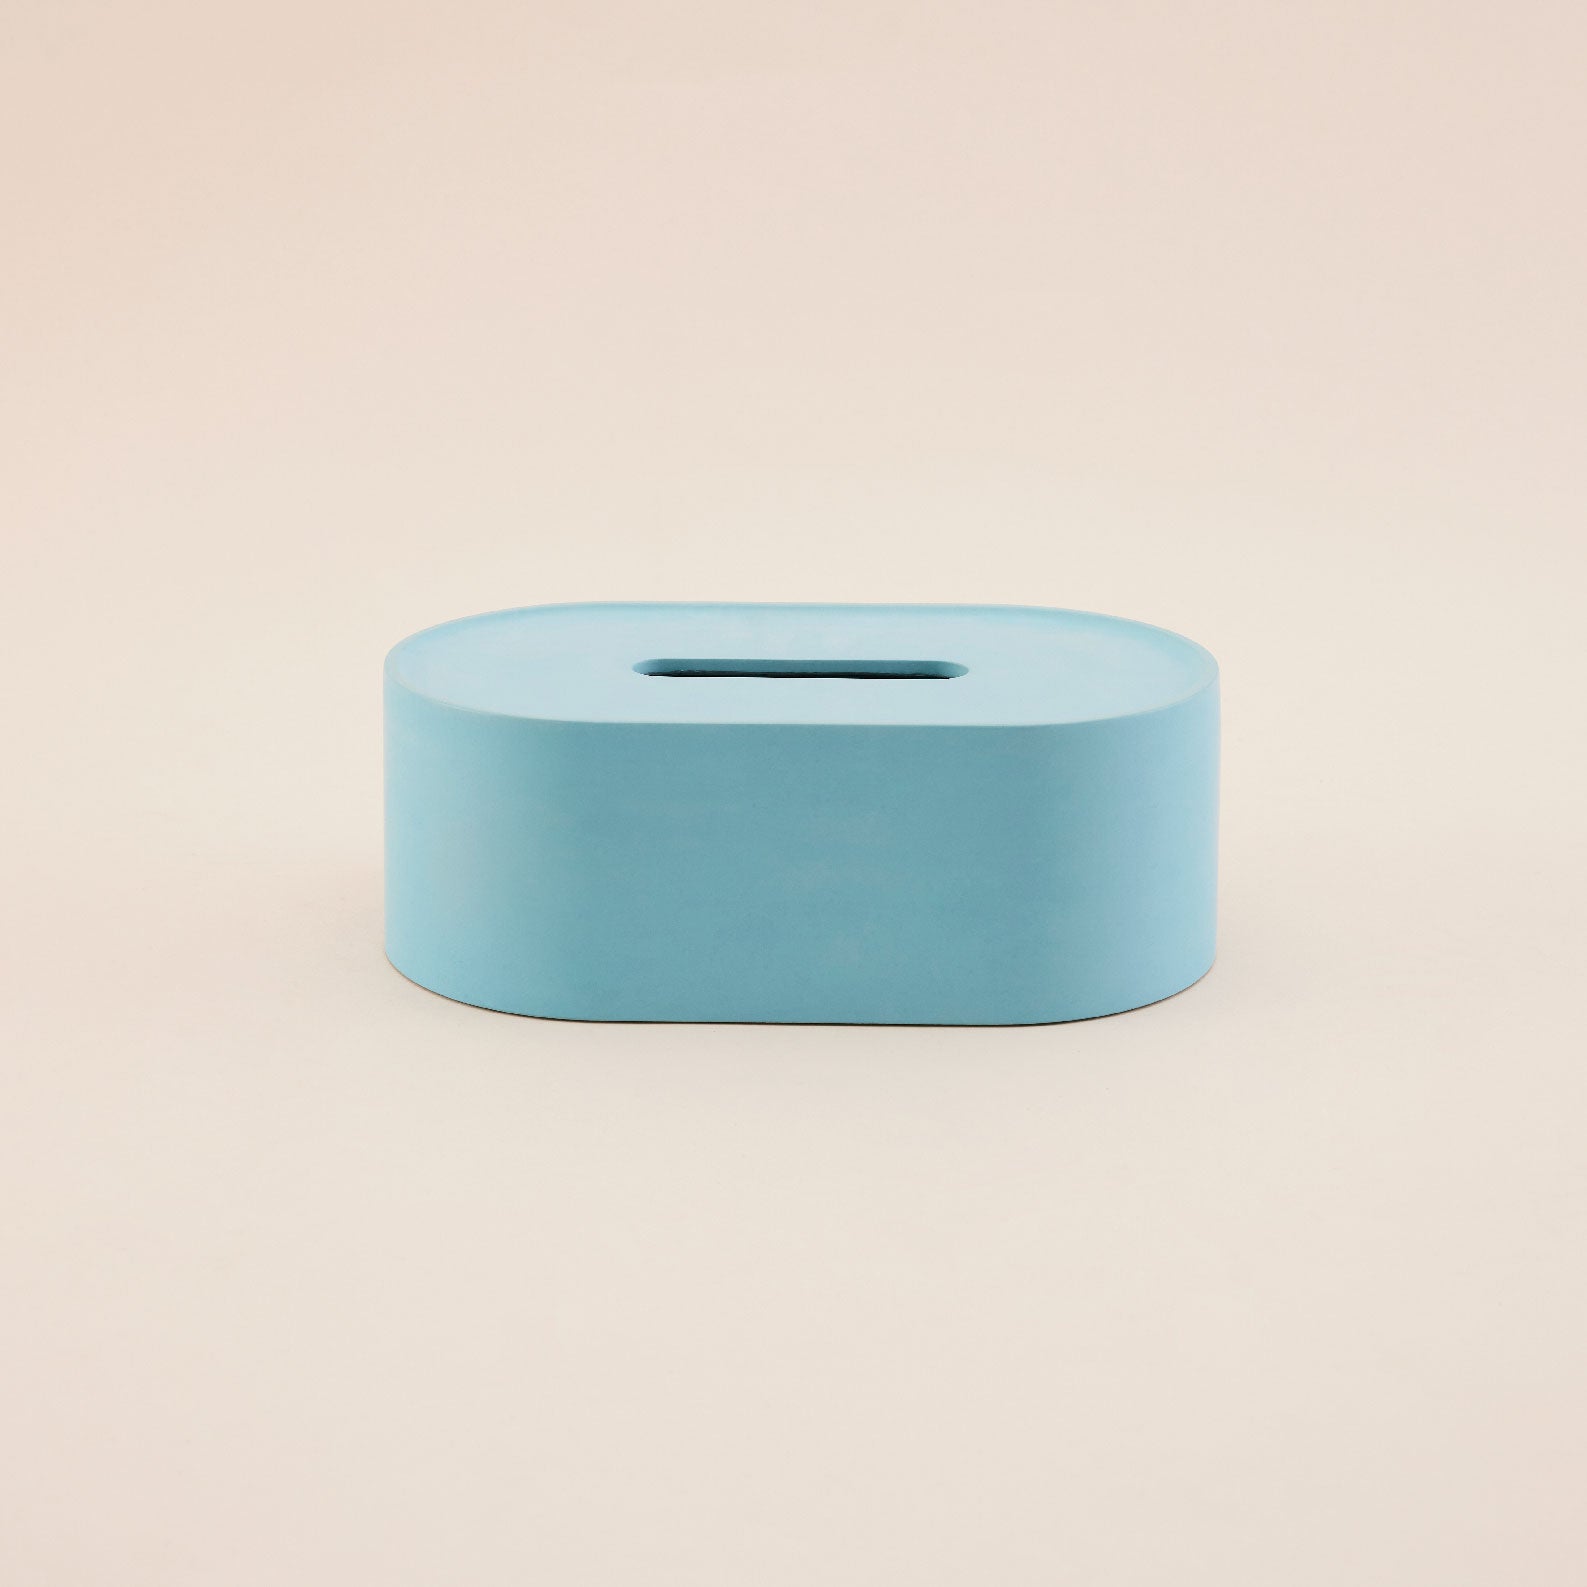 Rounded Rectangle Concrete Tissue Box |  กล่องทิชชูคอนกรีต